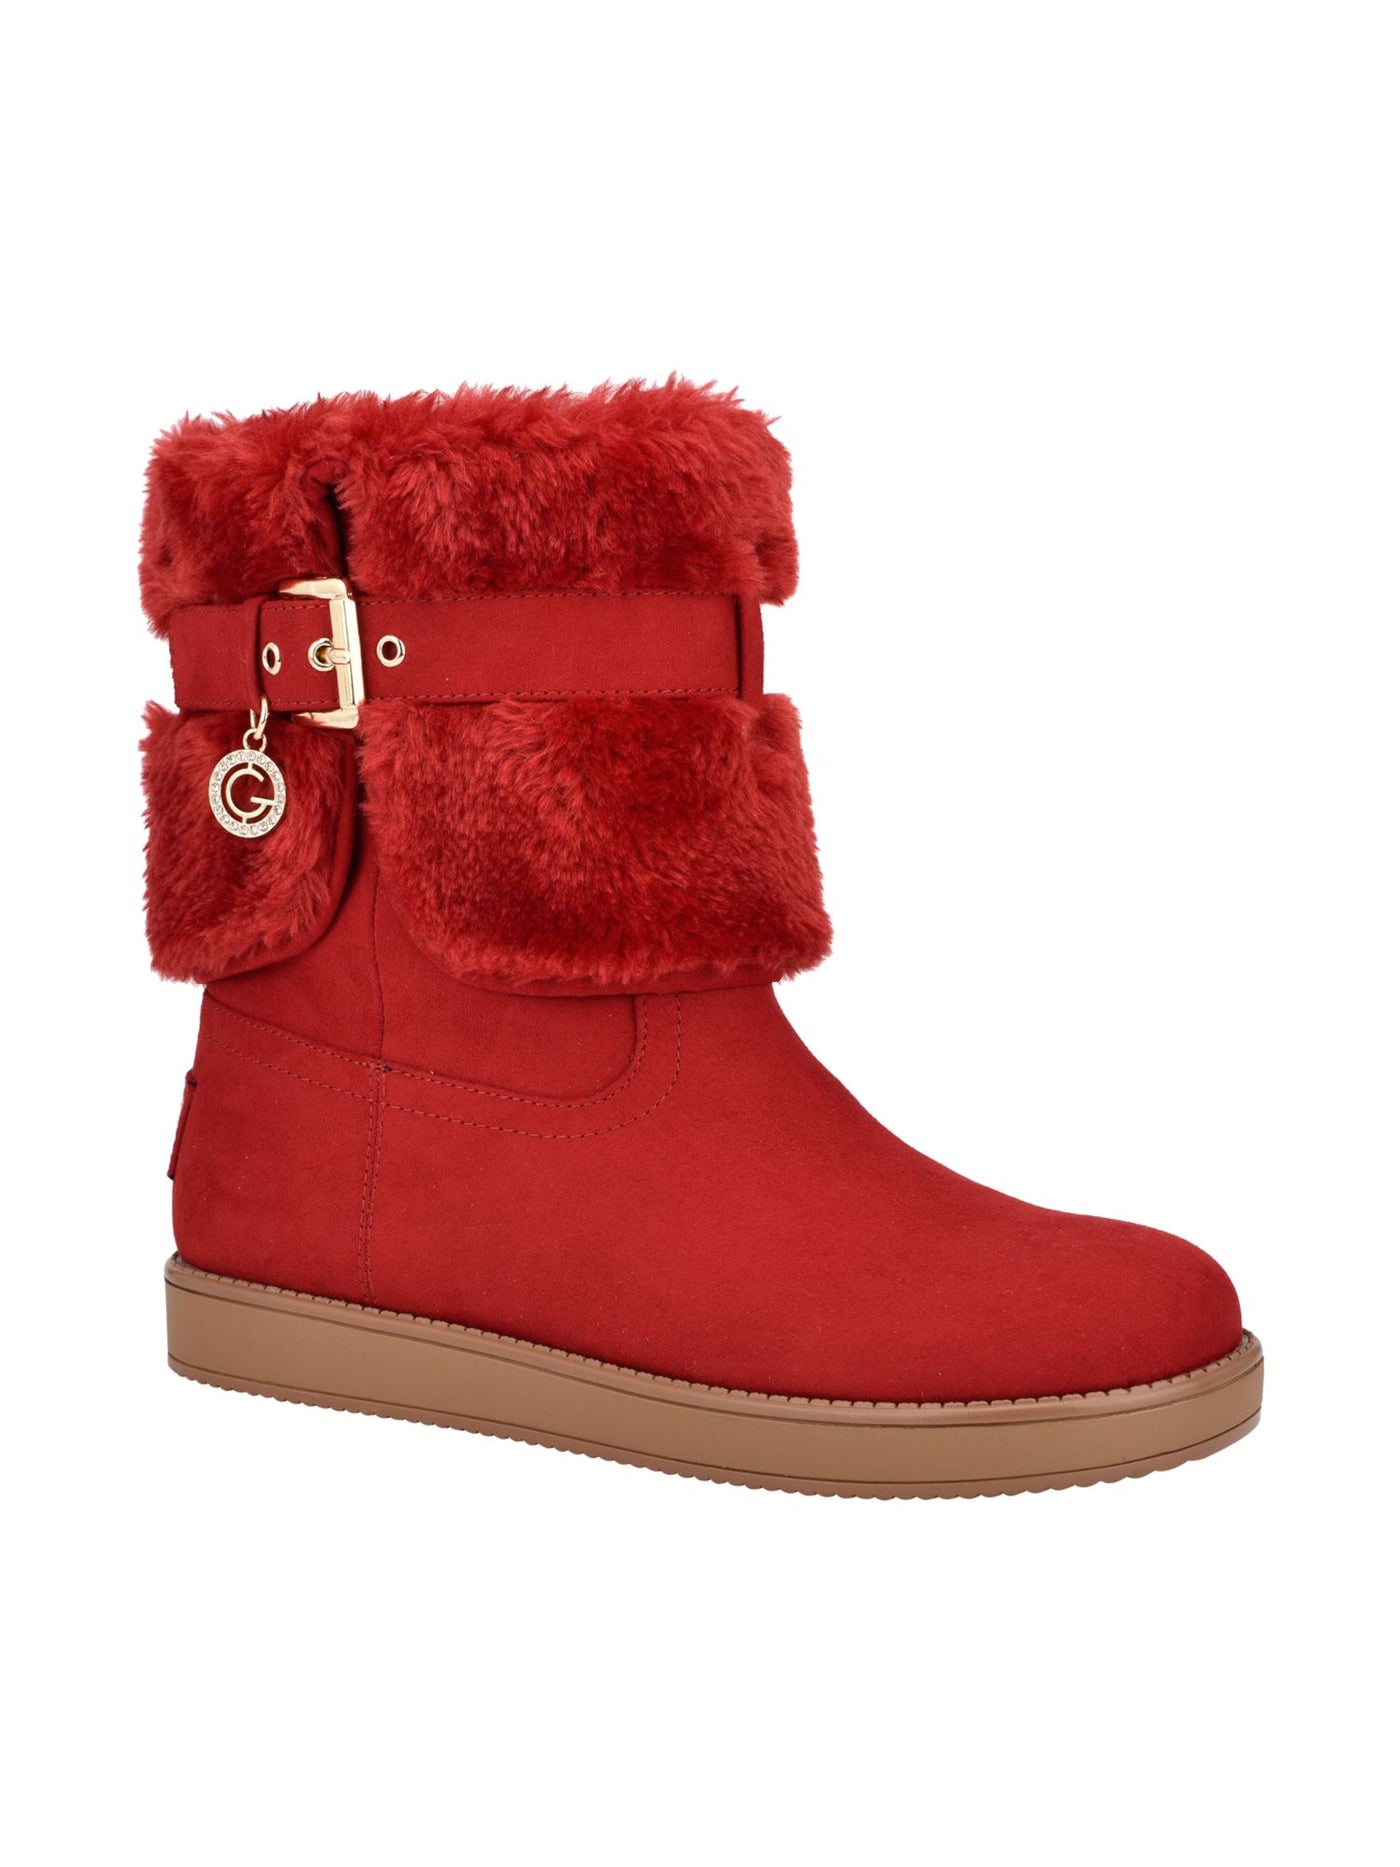 GBG Womens Red Buckle Accent Cushioned Round Toe Snow Boots 5